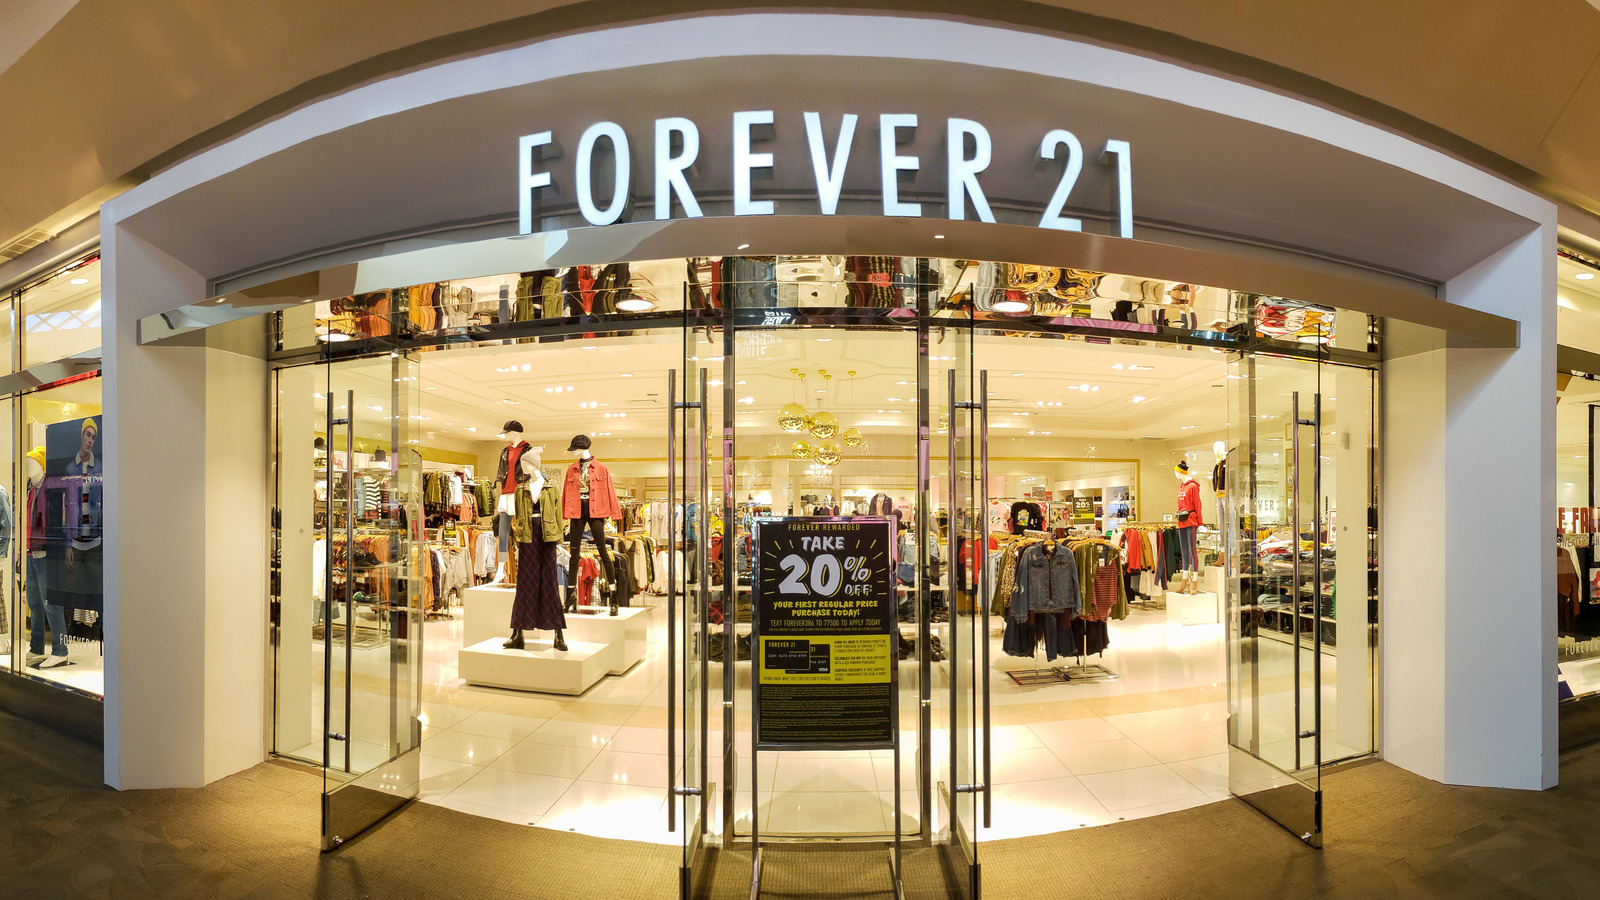 https://www.thelist.com/img/gallery/the-real-reasons-you-should-avoid-shopping-at-forever-21-are-now-clear/l-intro-1659799467.jpg